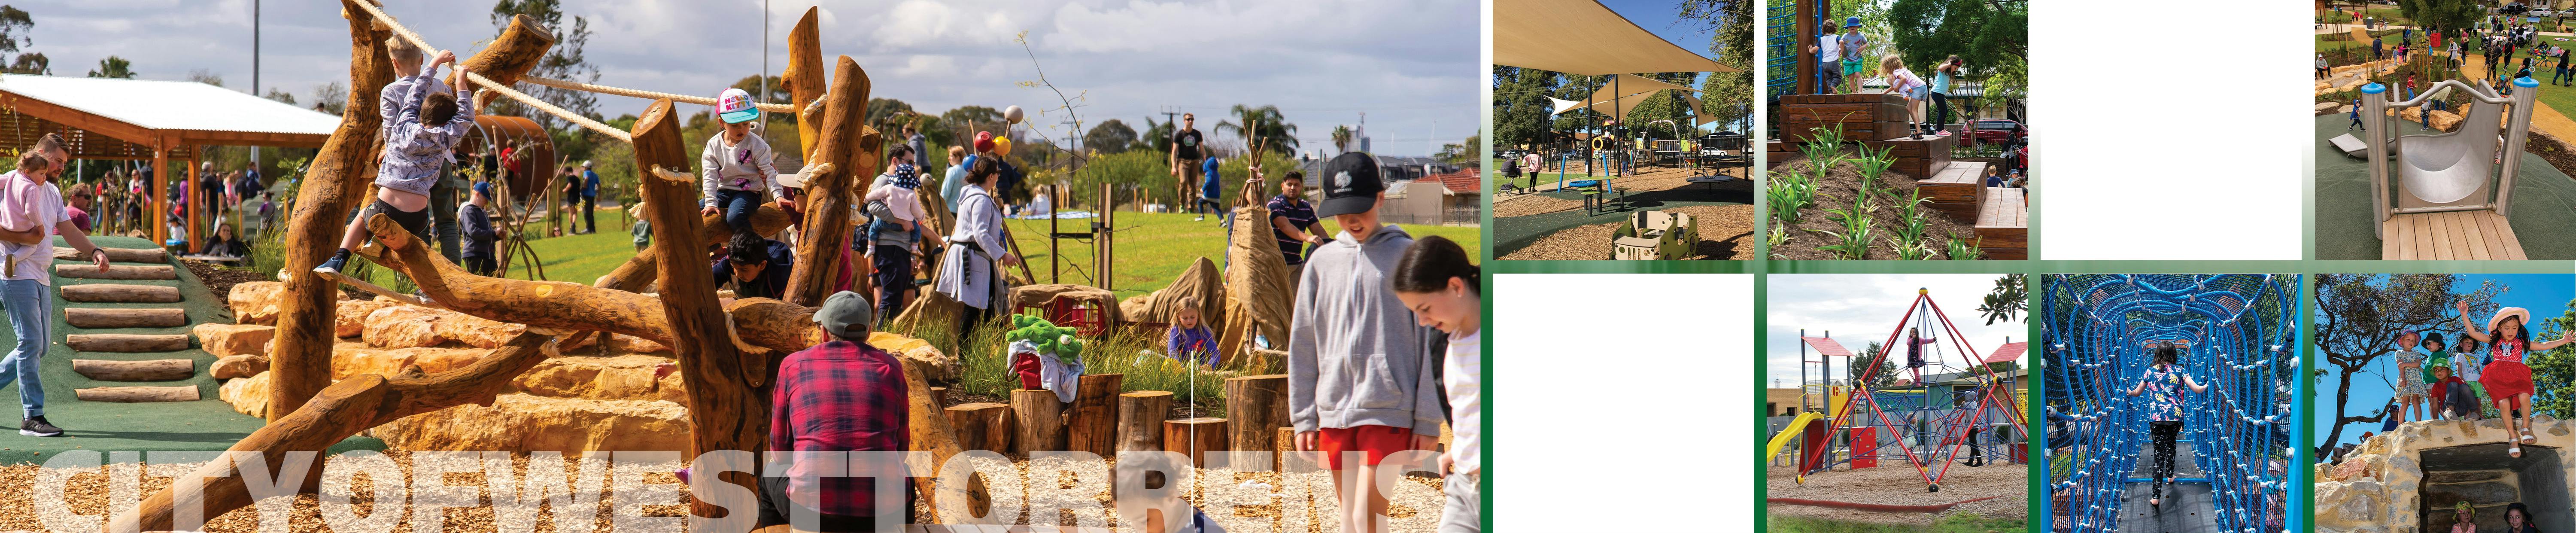 Montage of playgrounds and reserves in West Torrens